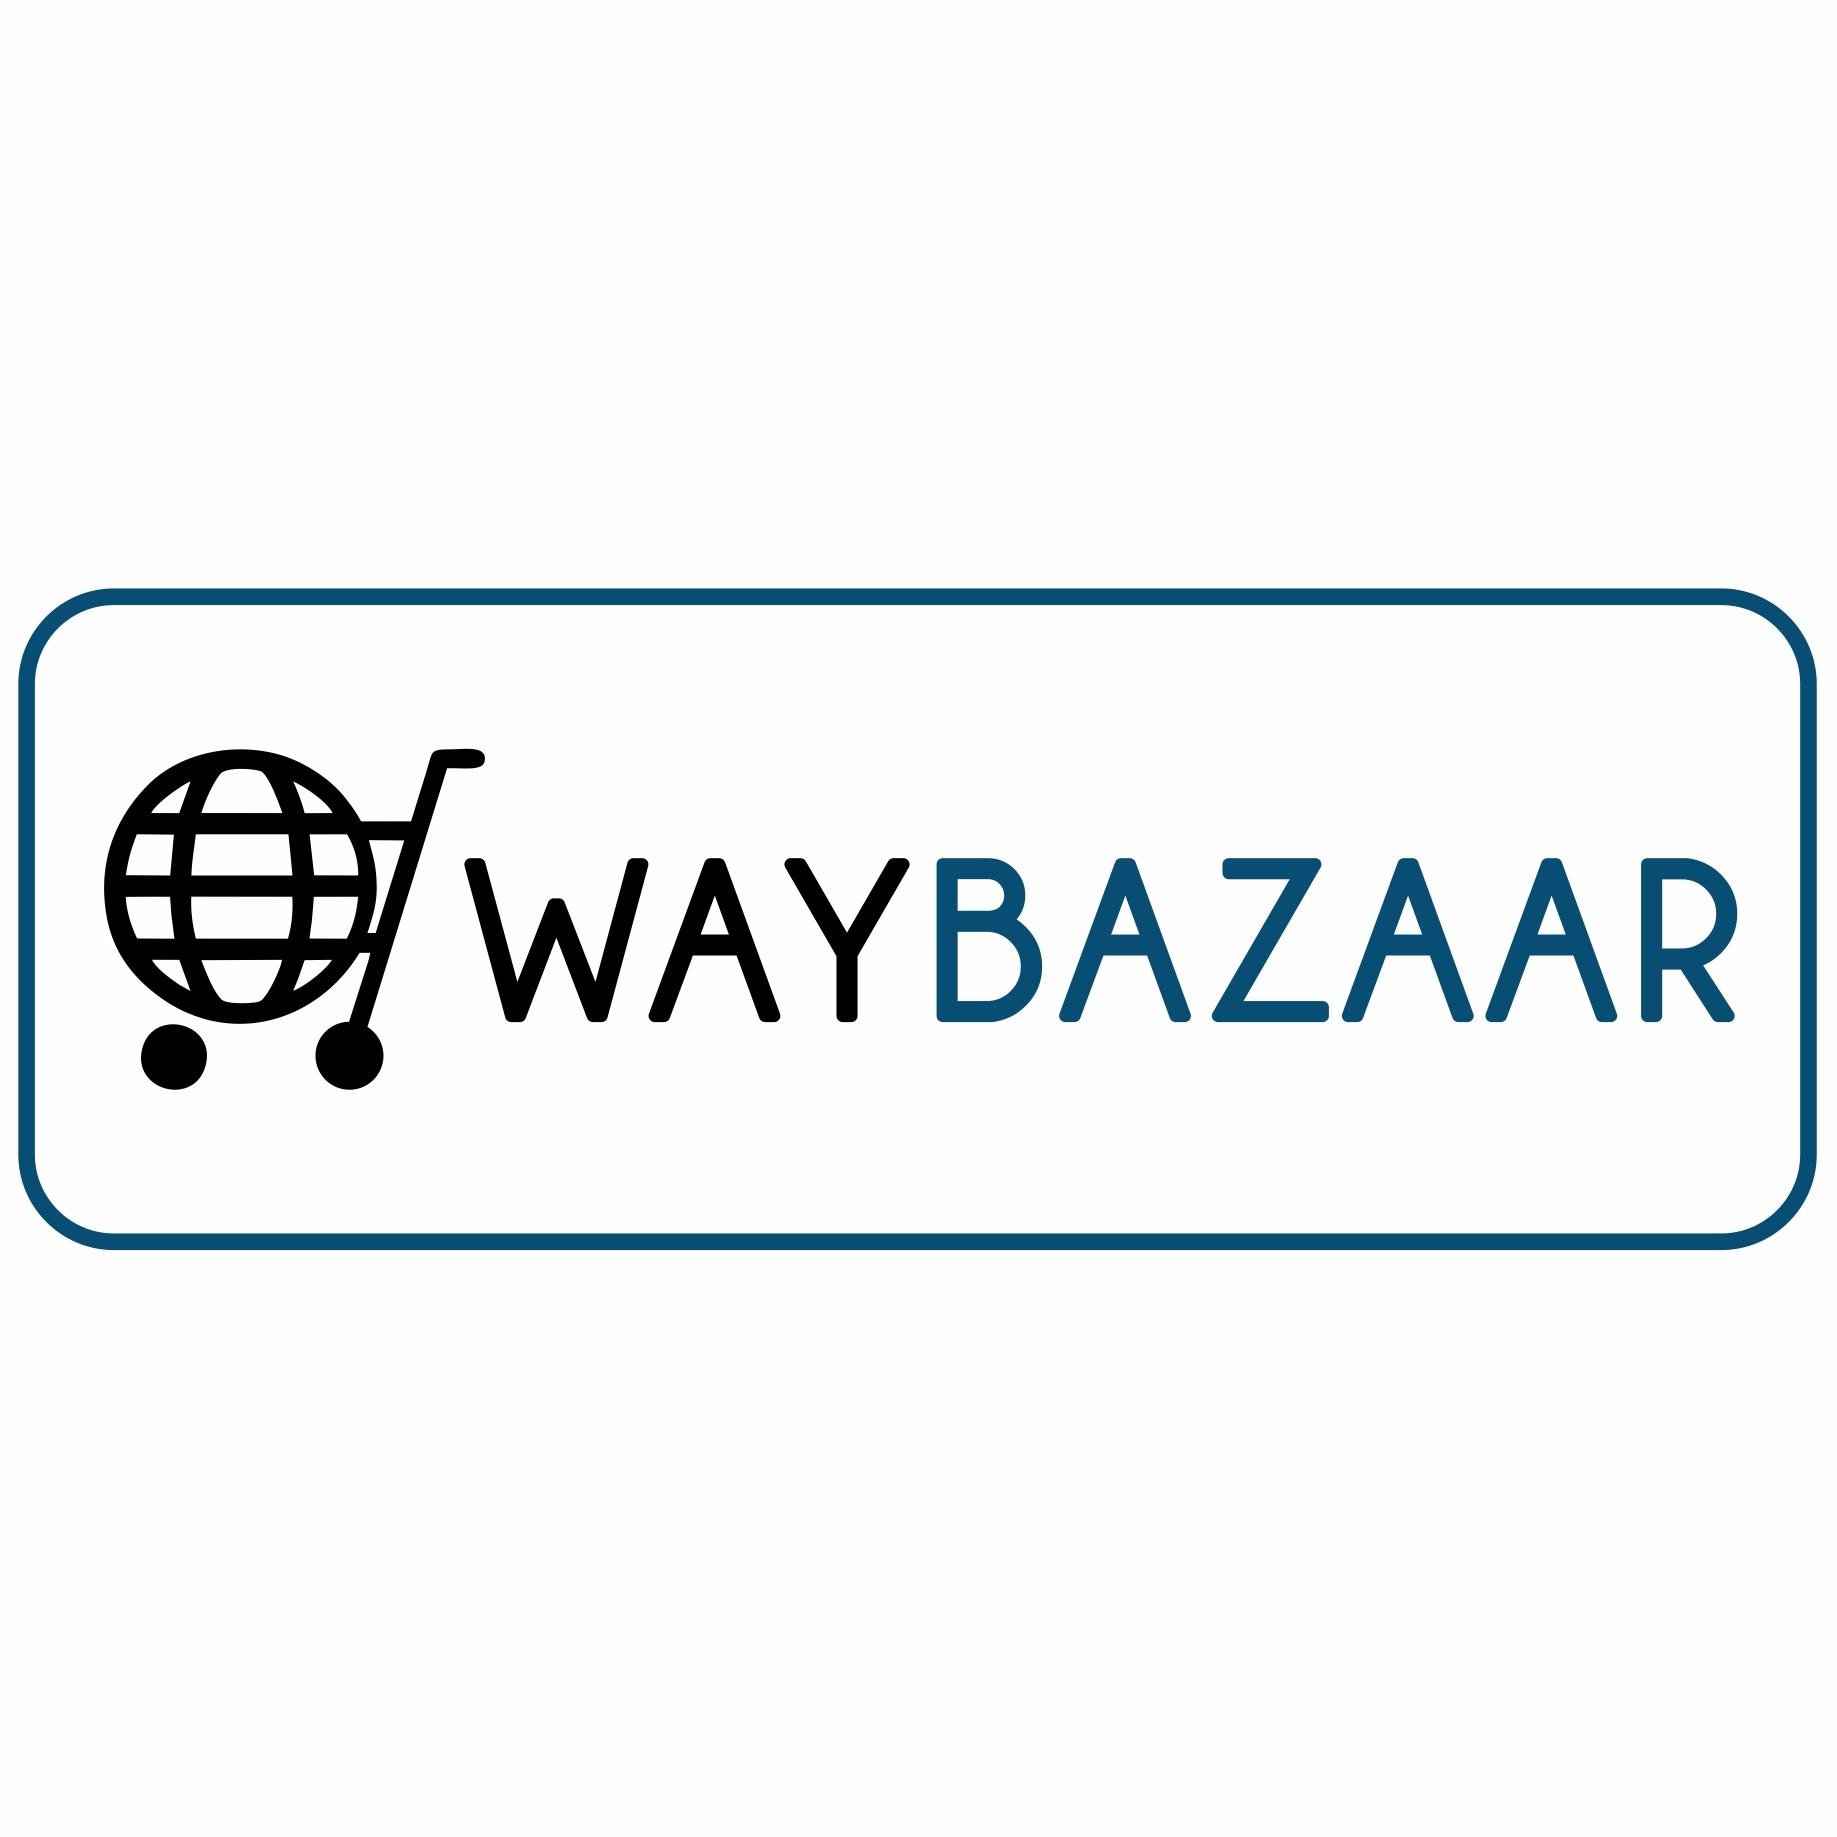 WayBazaar is an online peer to peer marketplace that is mashing #ecommerce and #blockchain together.  

#ebay #etsy #craigslist 
#crypto #buycrypto  #altcoins